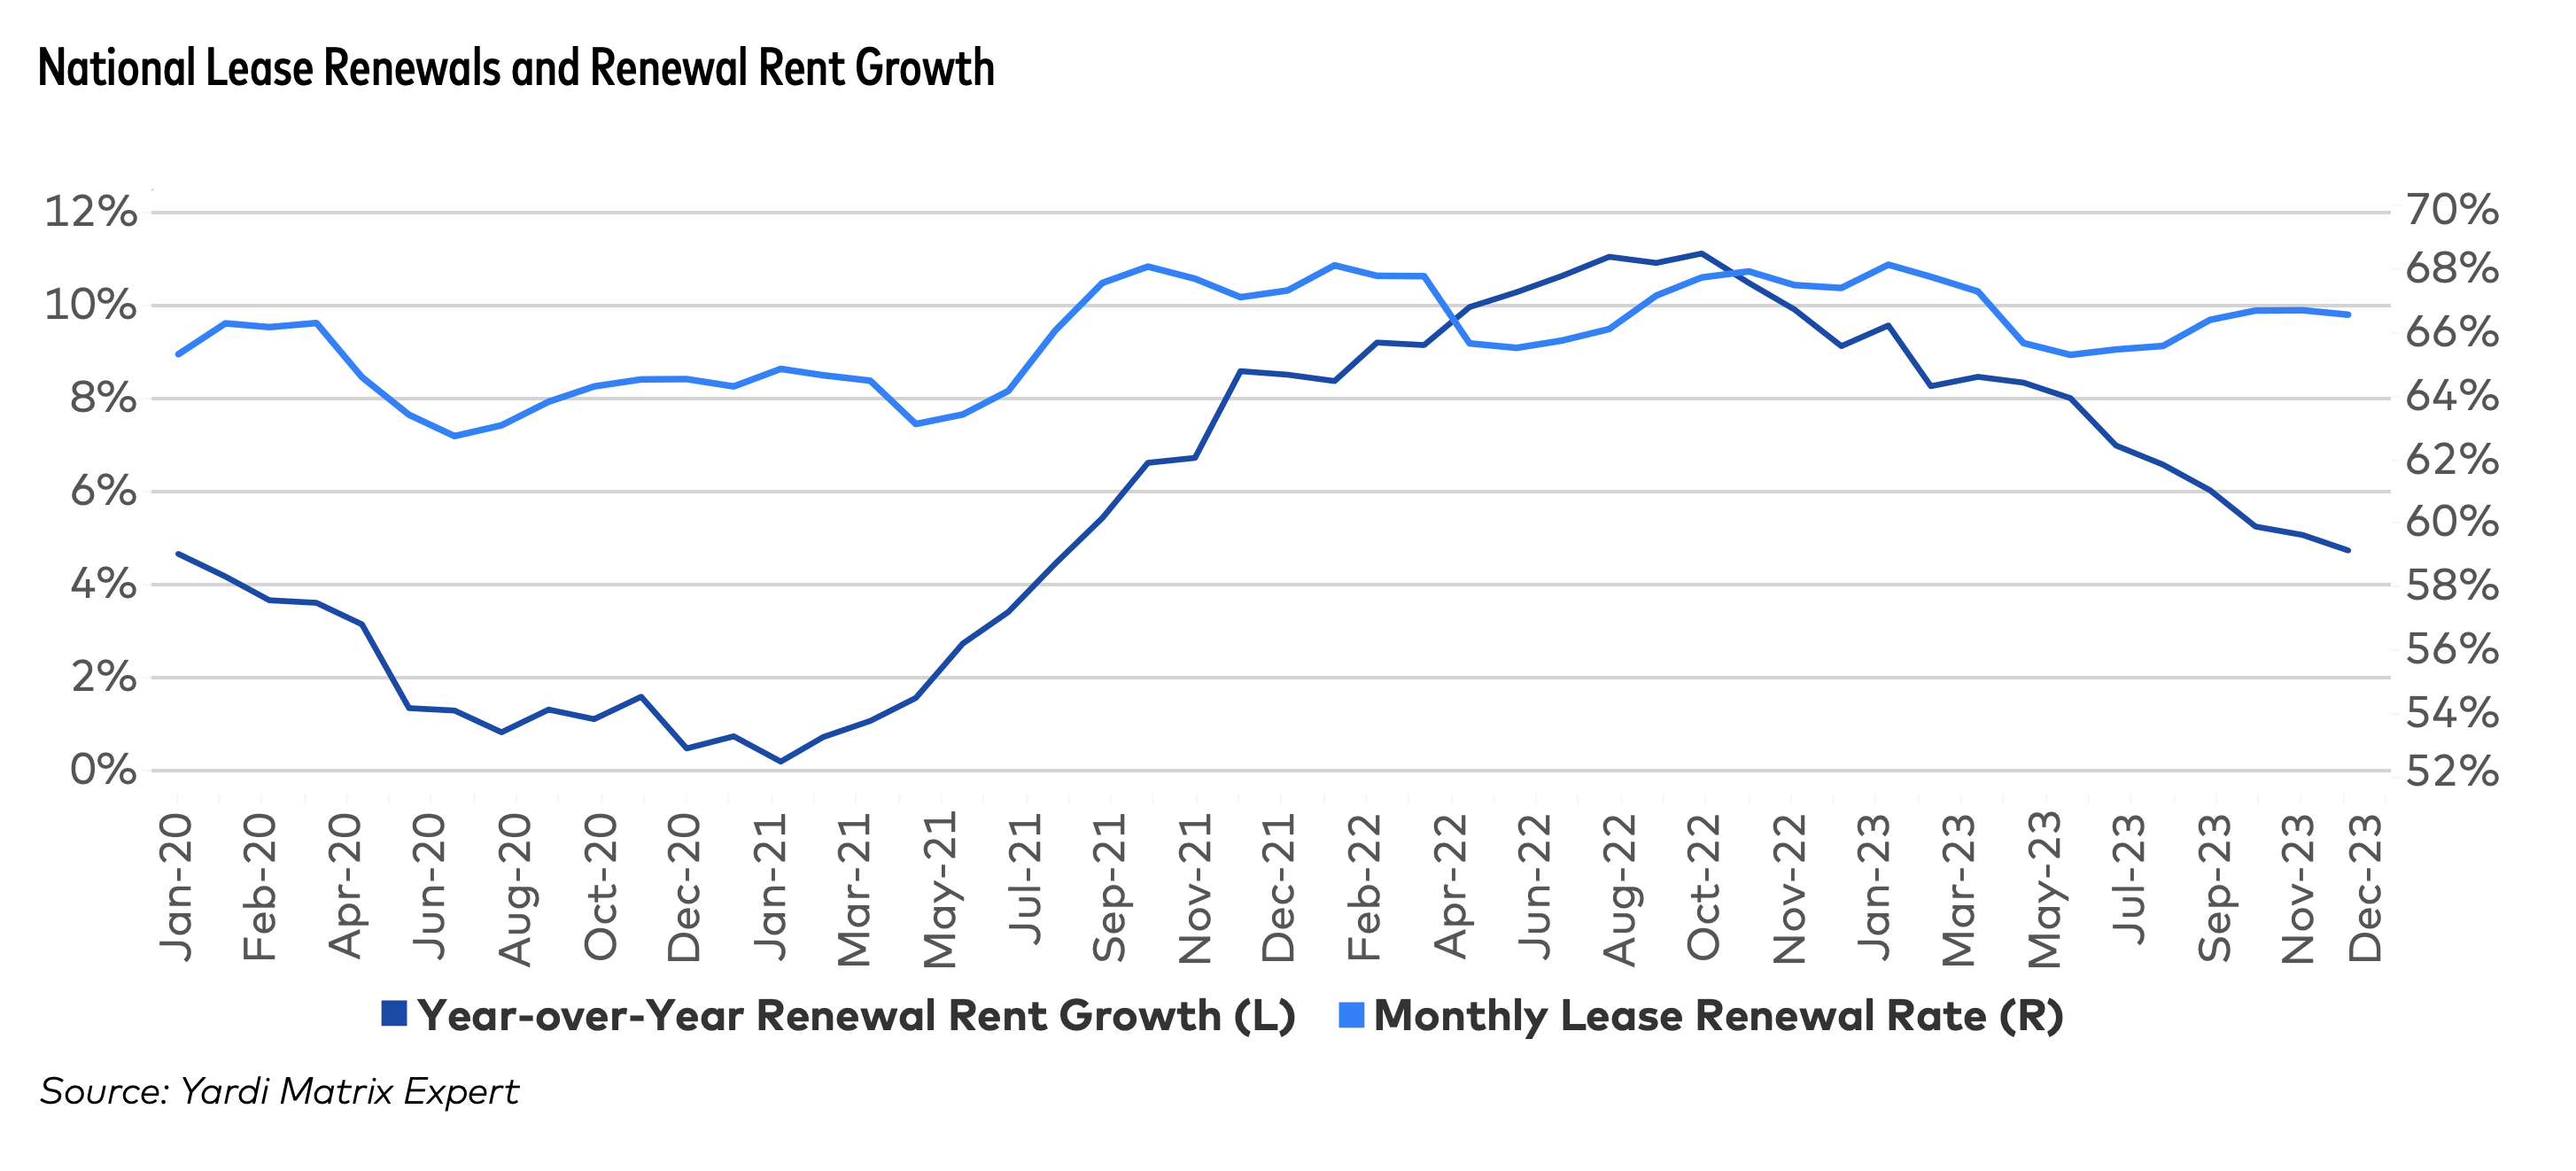 National lease renewals and renewal rent growth